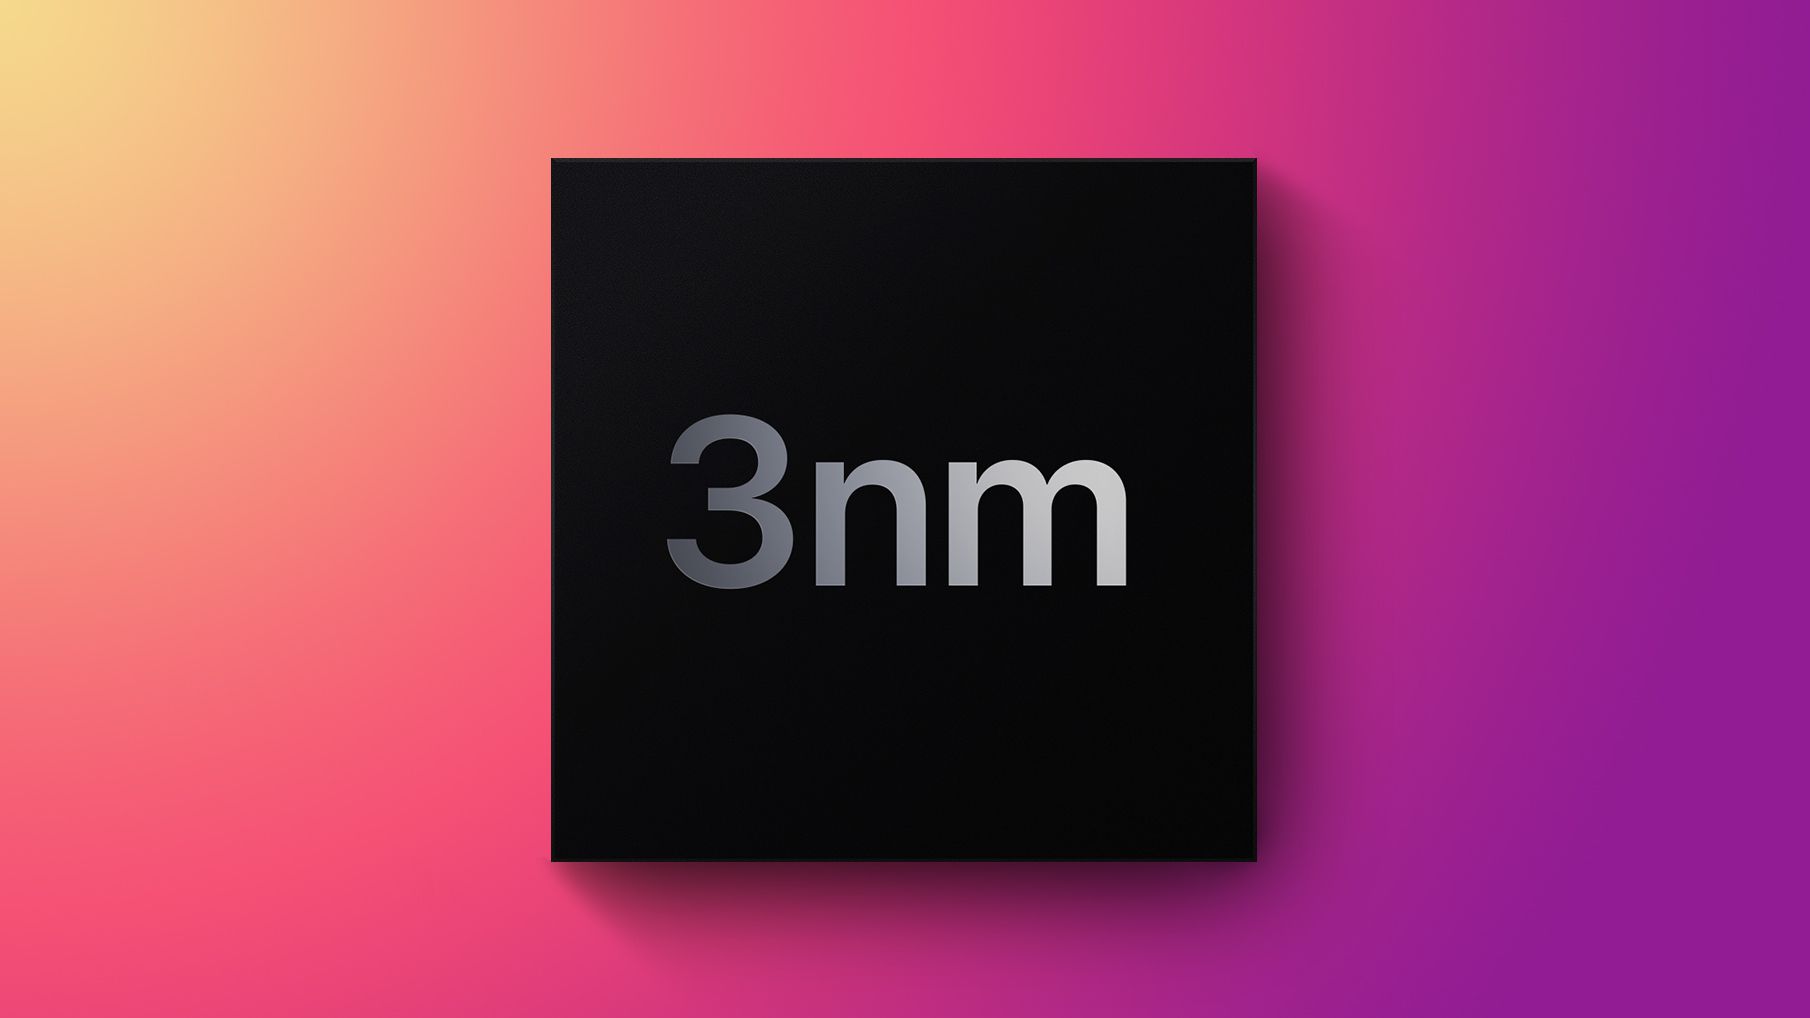 3nm apple silicon feature